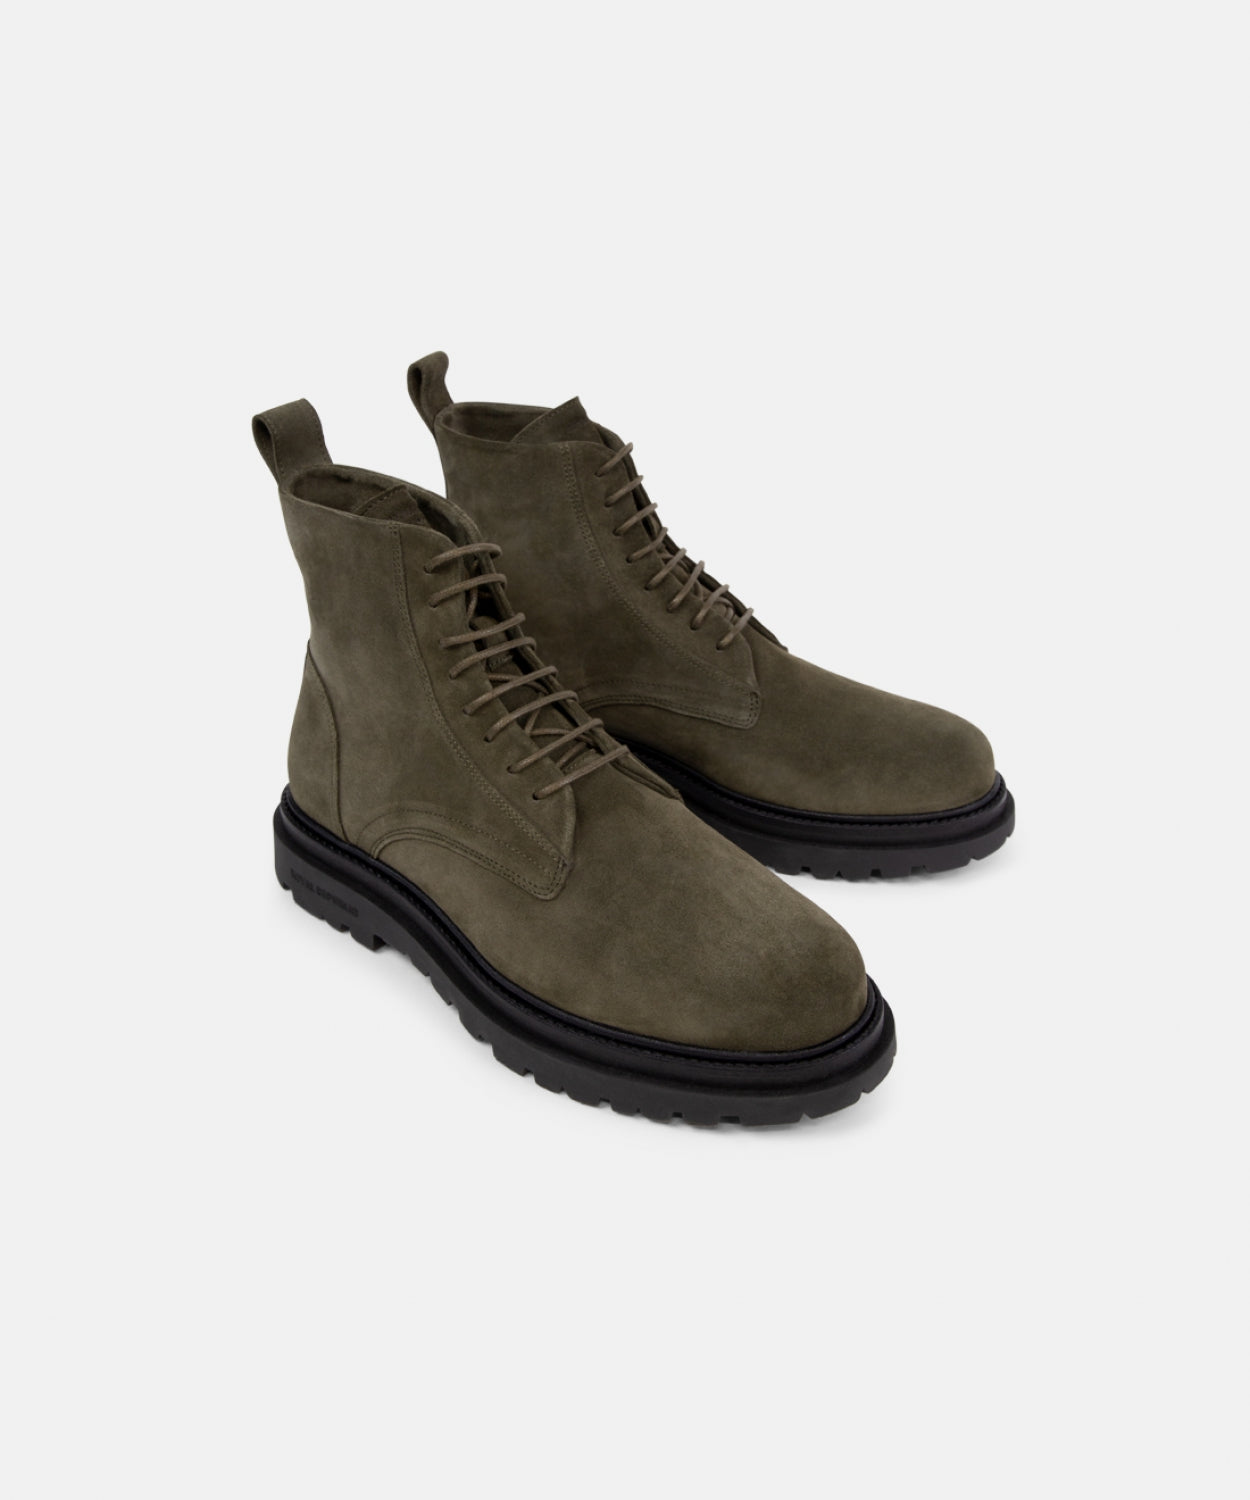 Rover lace Up Boot Suede 245 | Dark Khaki